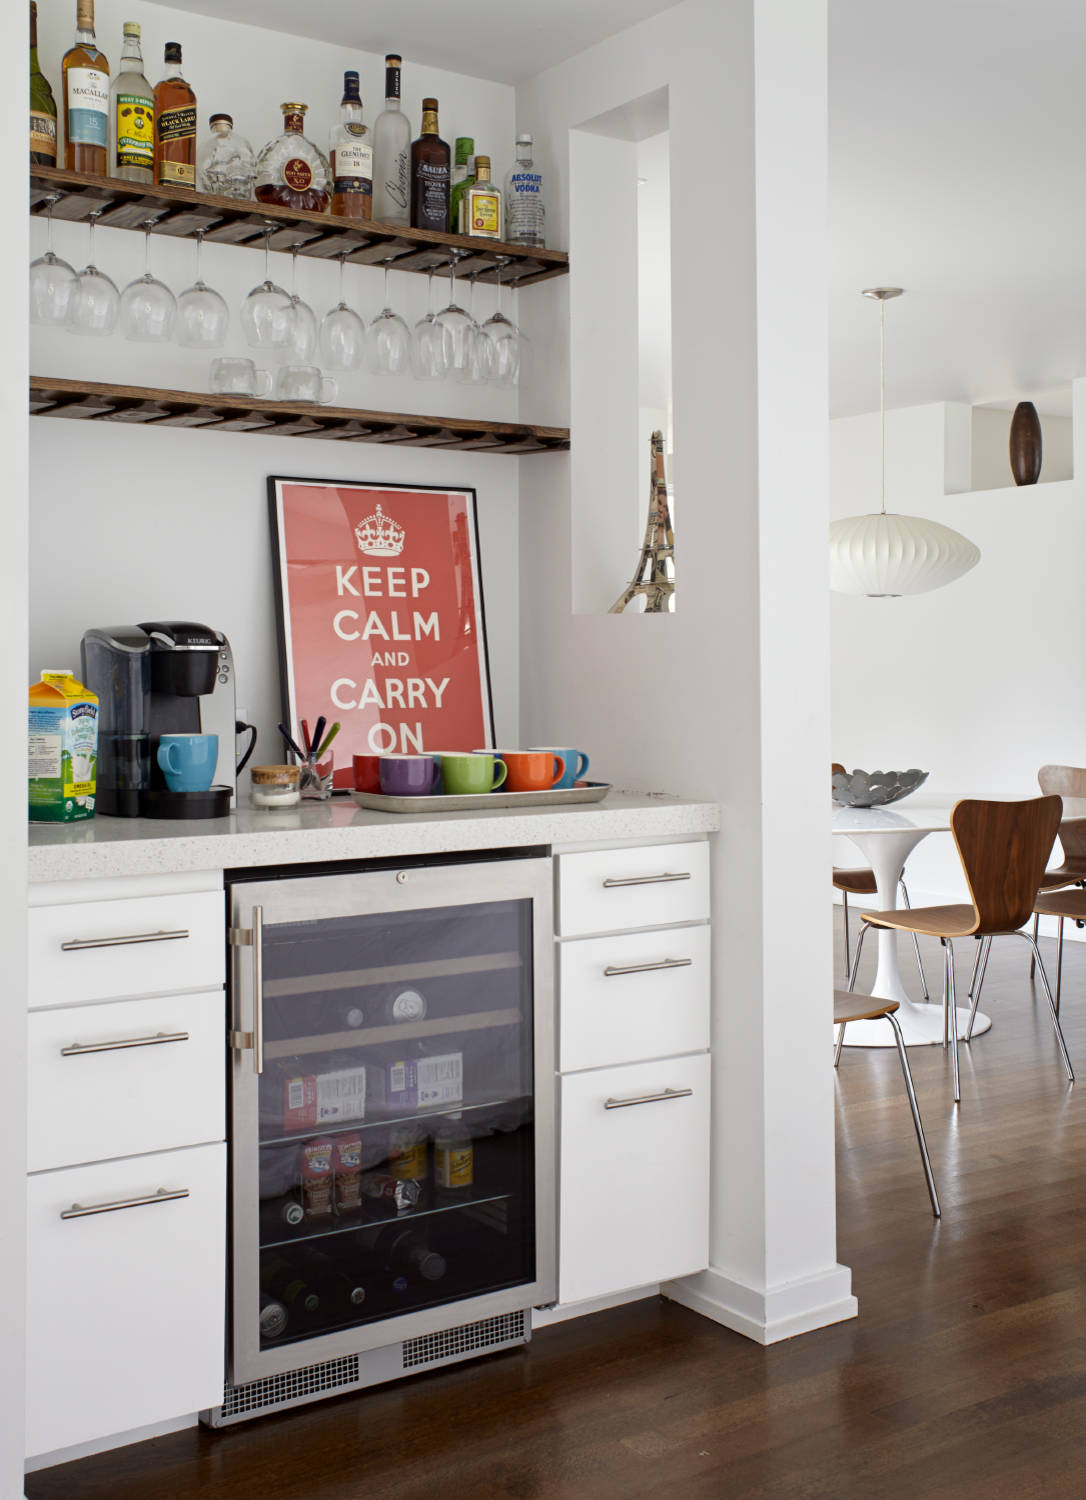 Coffee Bars to Wine Bars: Growing Kitchen Trends – Kitchen and